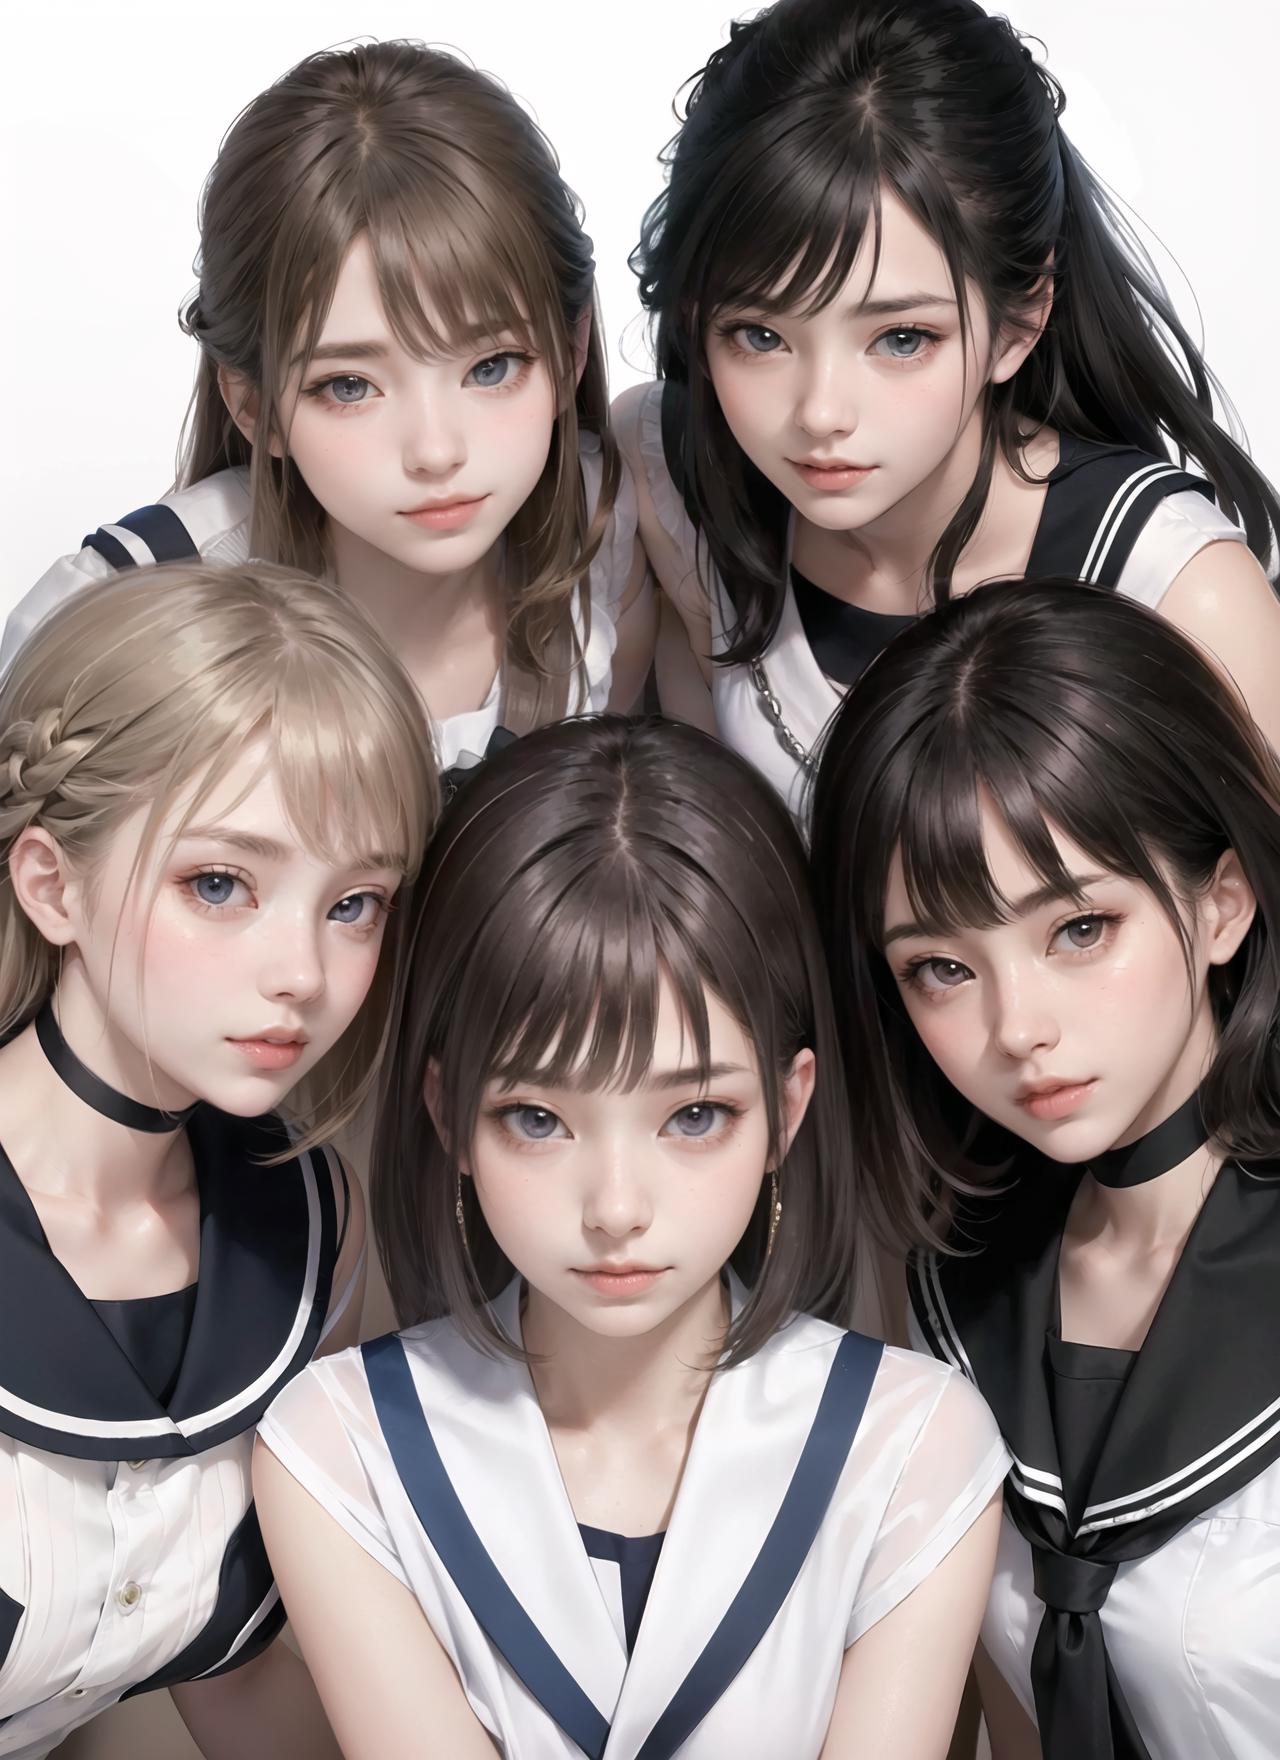 A group of six anime girls in sailor suits pose together for a photo.